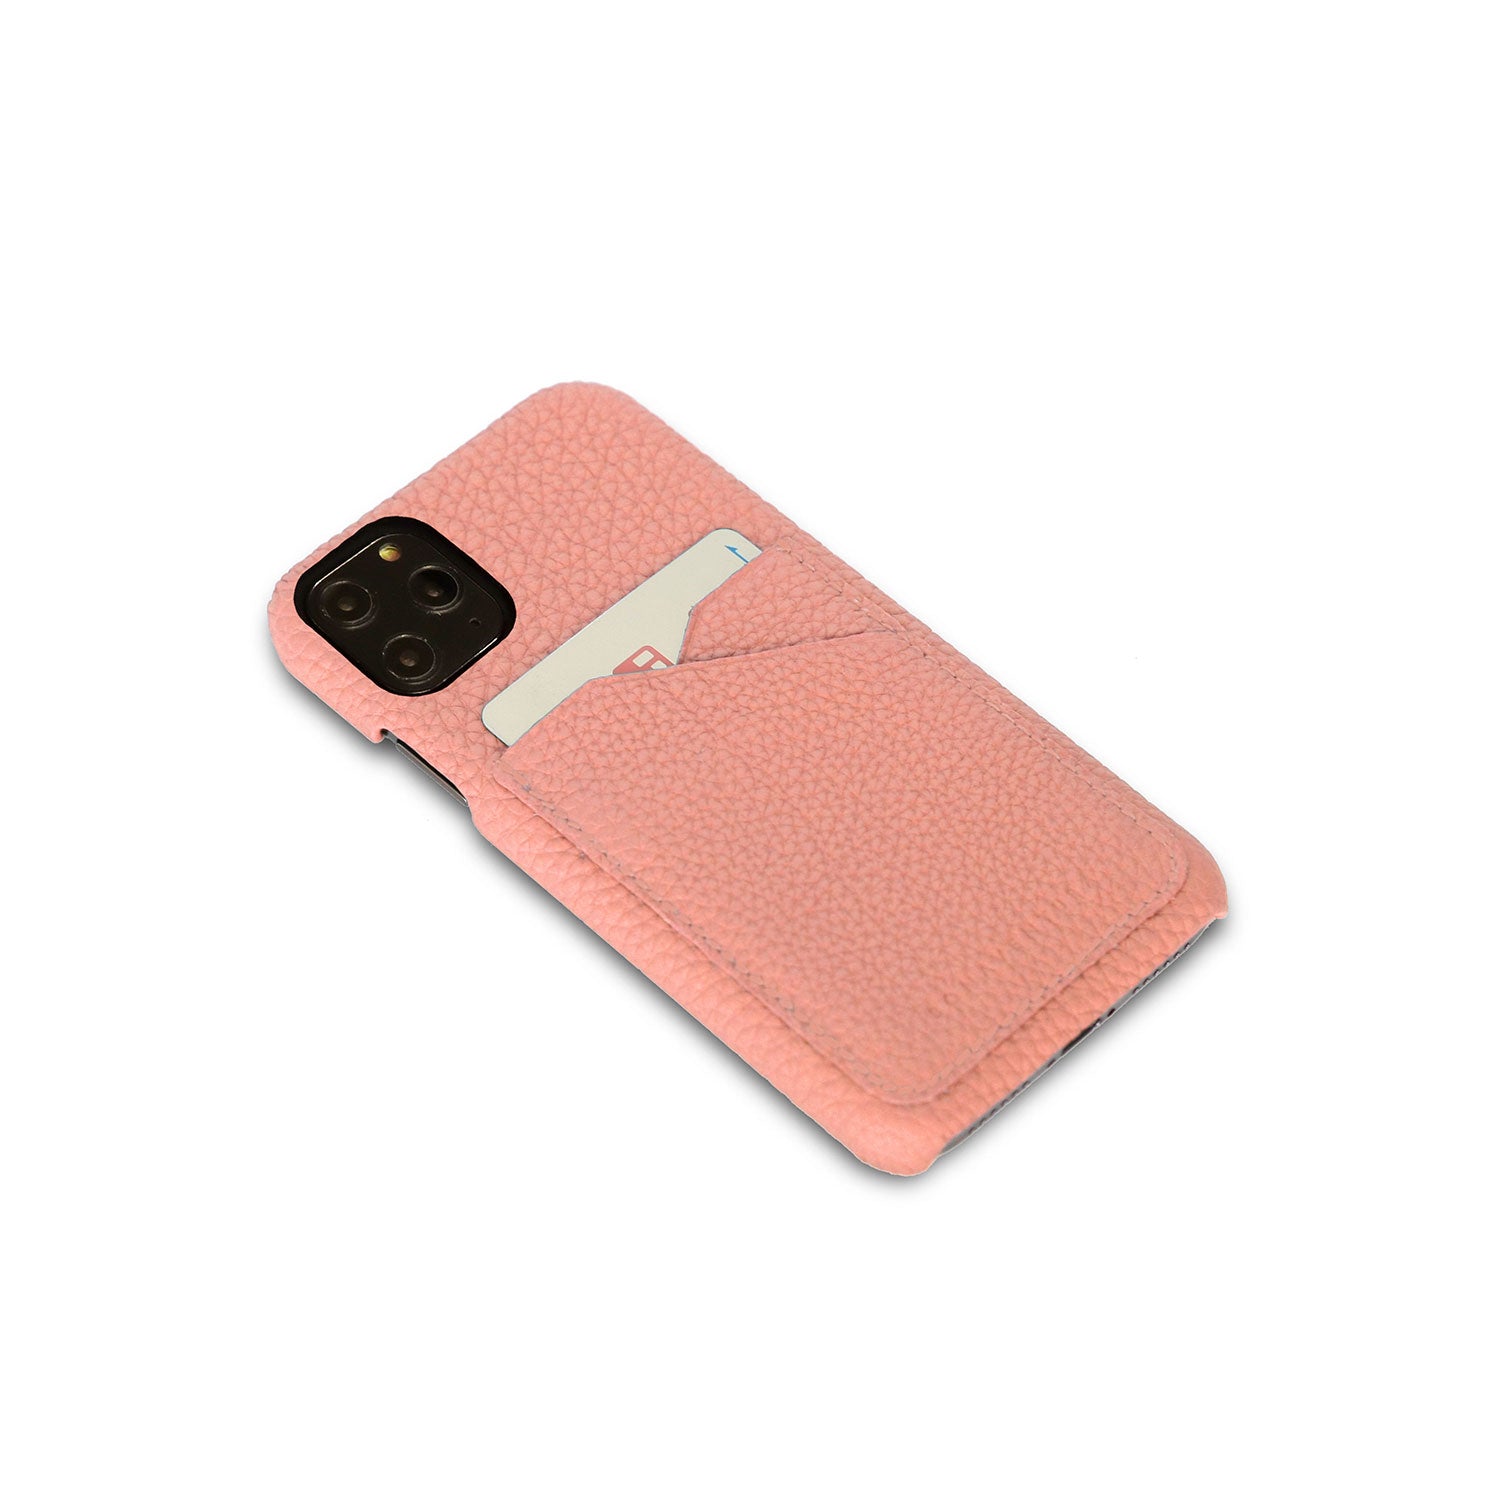 (iPhone 11 Pro) Back cover case Shrink leather